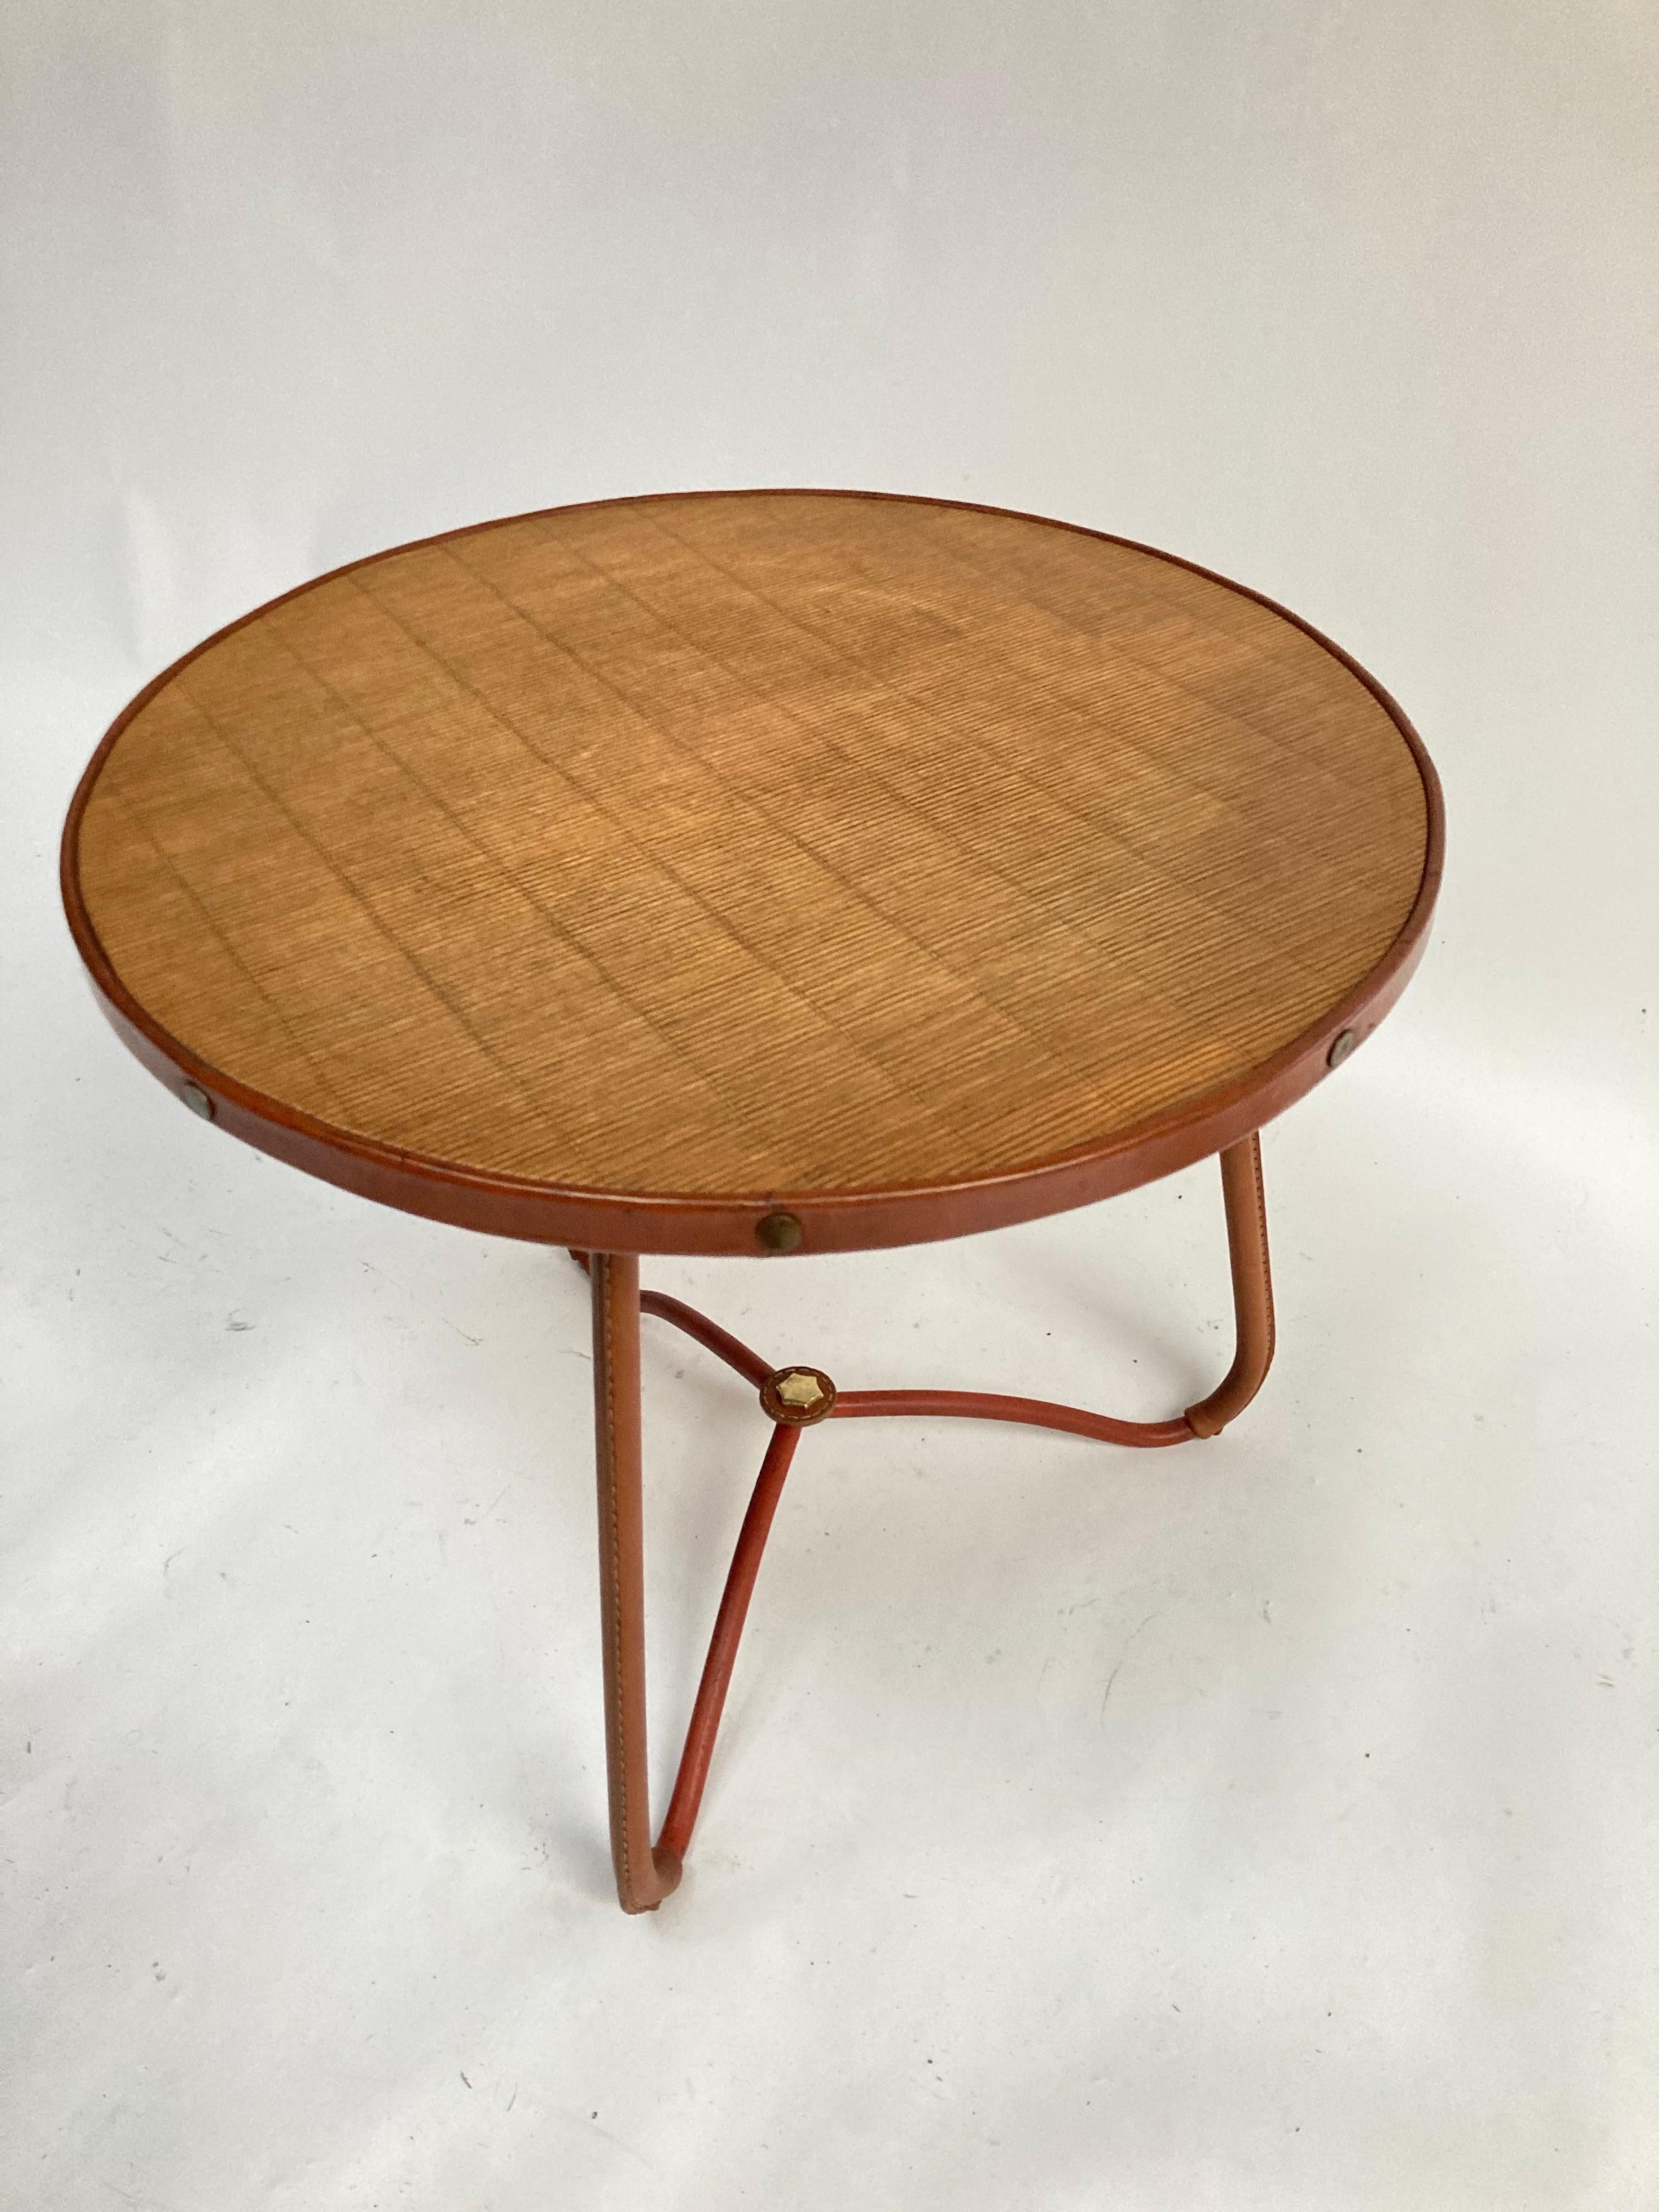 Metal 1950's Stitched Leather Table by Jacques Adnet